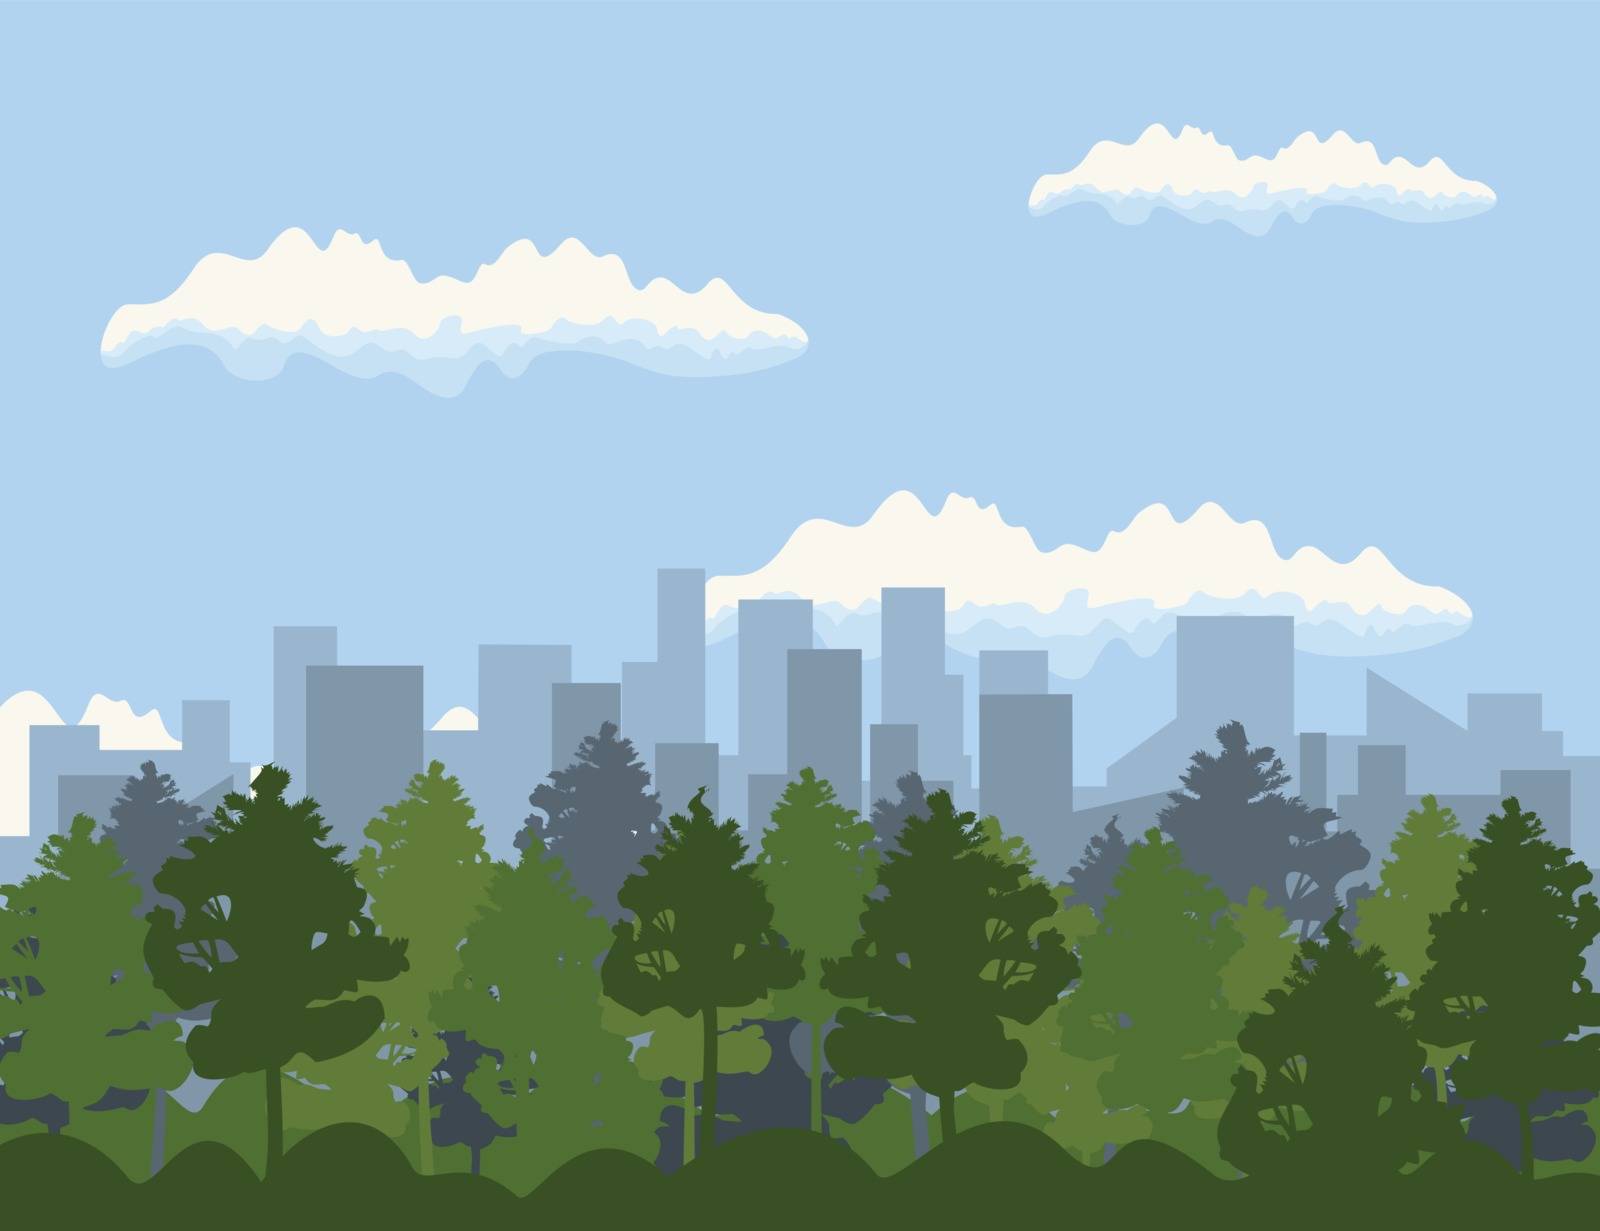 Landscape of a city and trees. A vector illustration